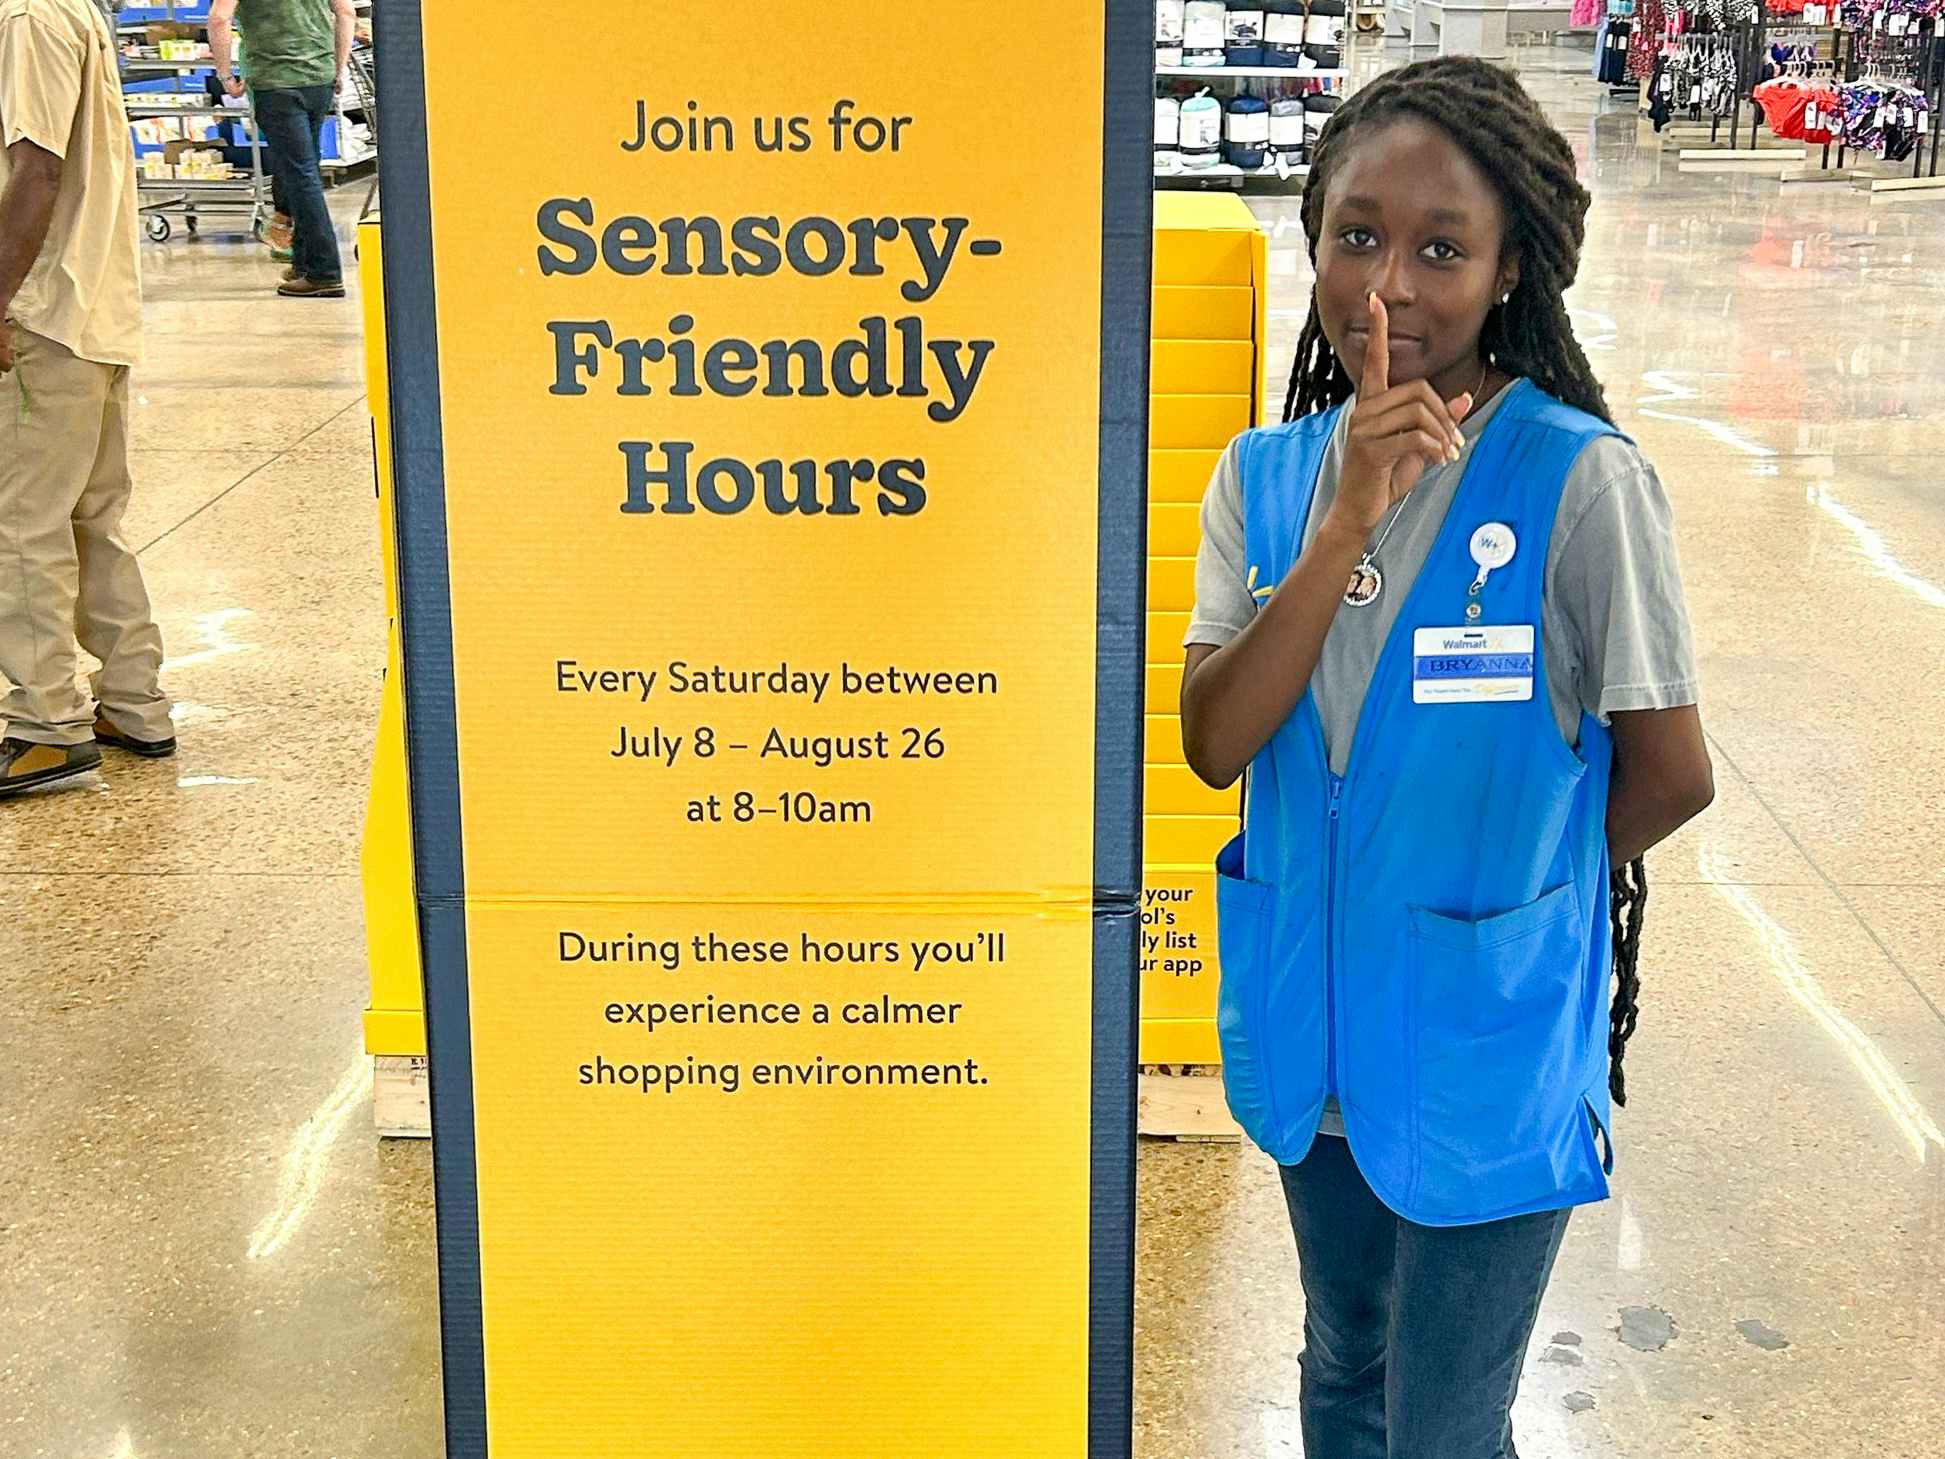 A Walmart employee standing next to a sign inside Walmart advertising their Sensory-Friendly store hours